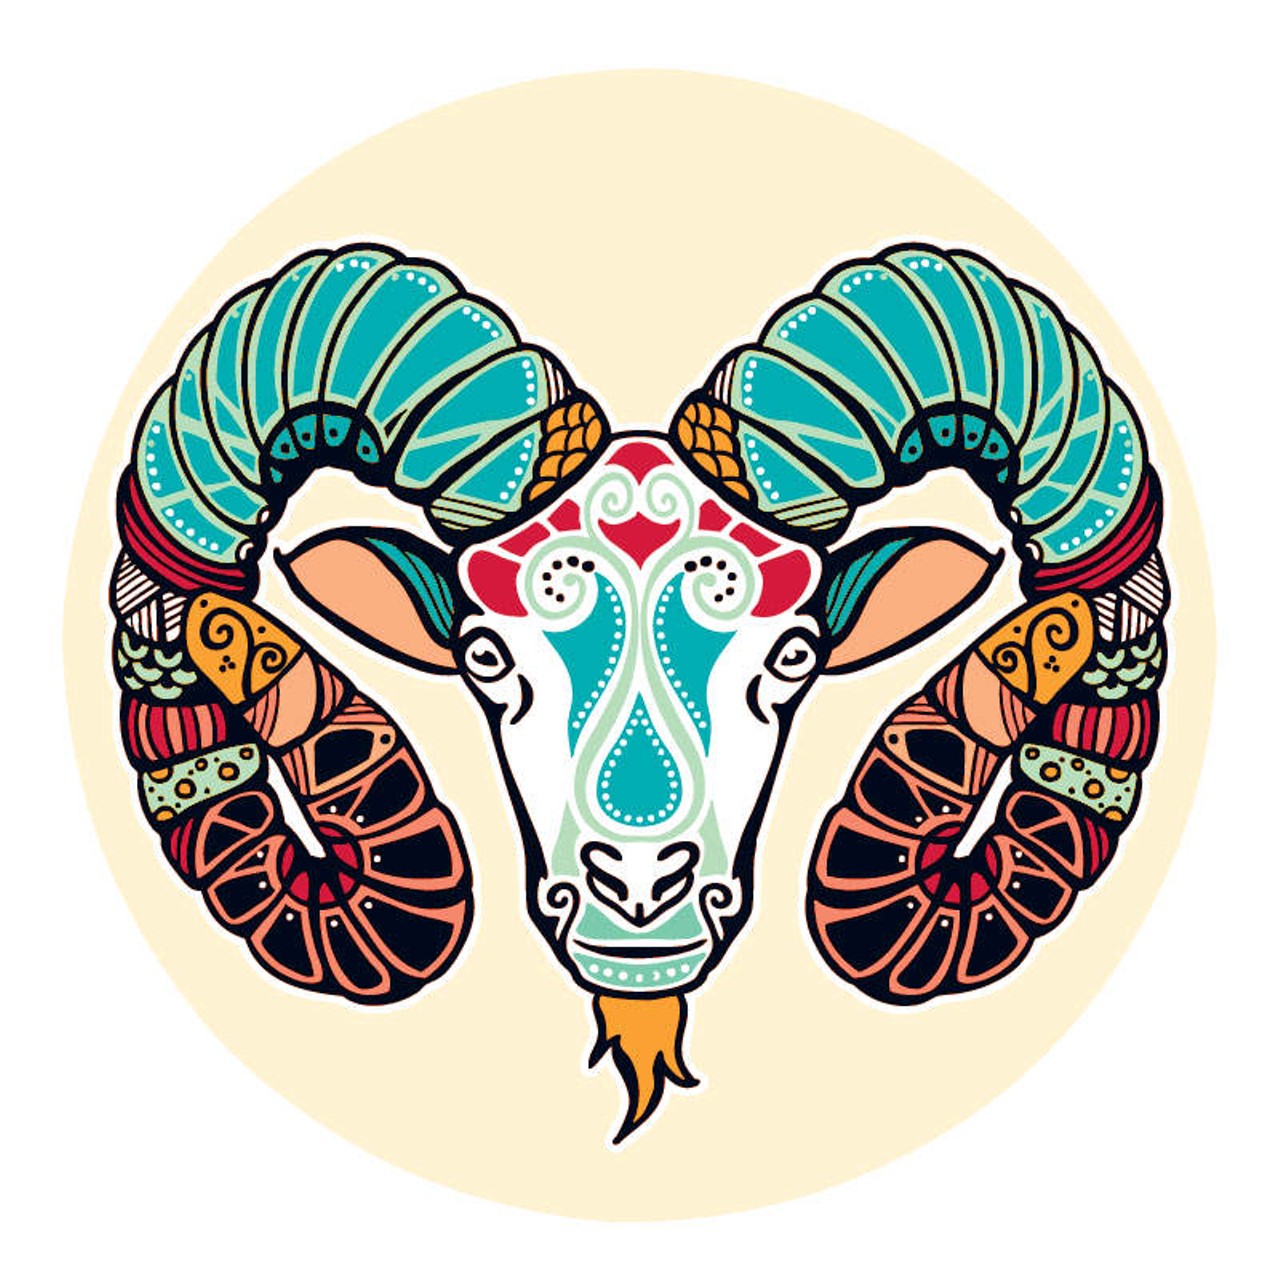 ARIES: March 21 &#150; April 20
You have enough confidence for ten people. What happens next depends on hanging on to just enough of it to find the courage to start over. Too many things have sprung up to make you more than ready to re-evaluate everything. If others are at fault, or if they somehow have forced long standing issues to come to a head, know that they just triggered things that needed to happen anyway. The long term plan looks like it can go as far as you want to take it. If you've come this far, now it's about the company you keep and the extent to which you keep walking your talk.